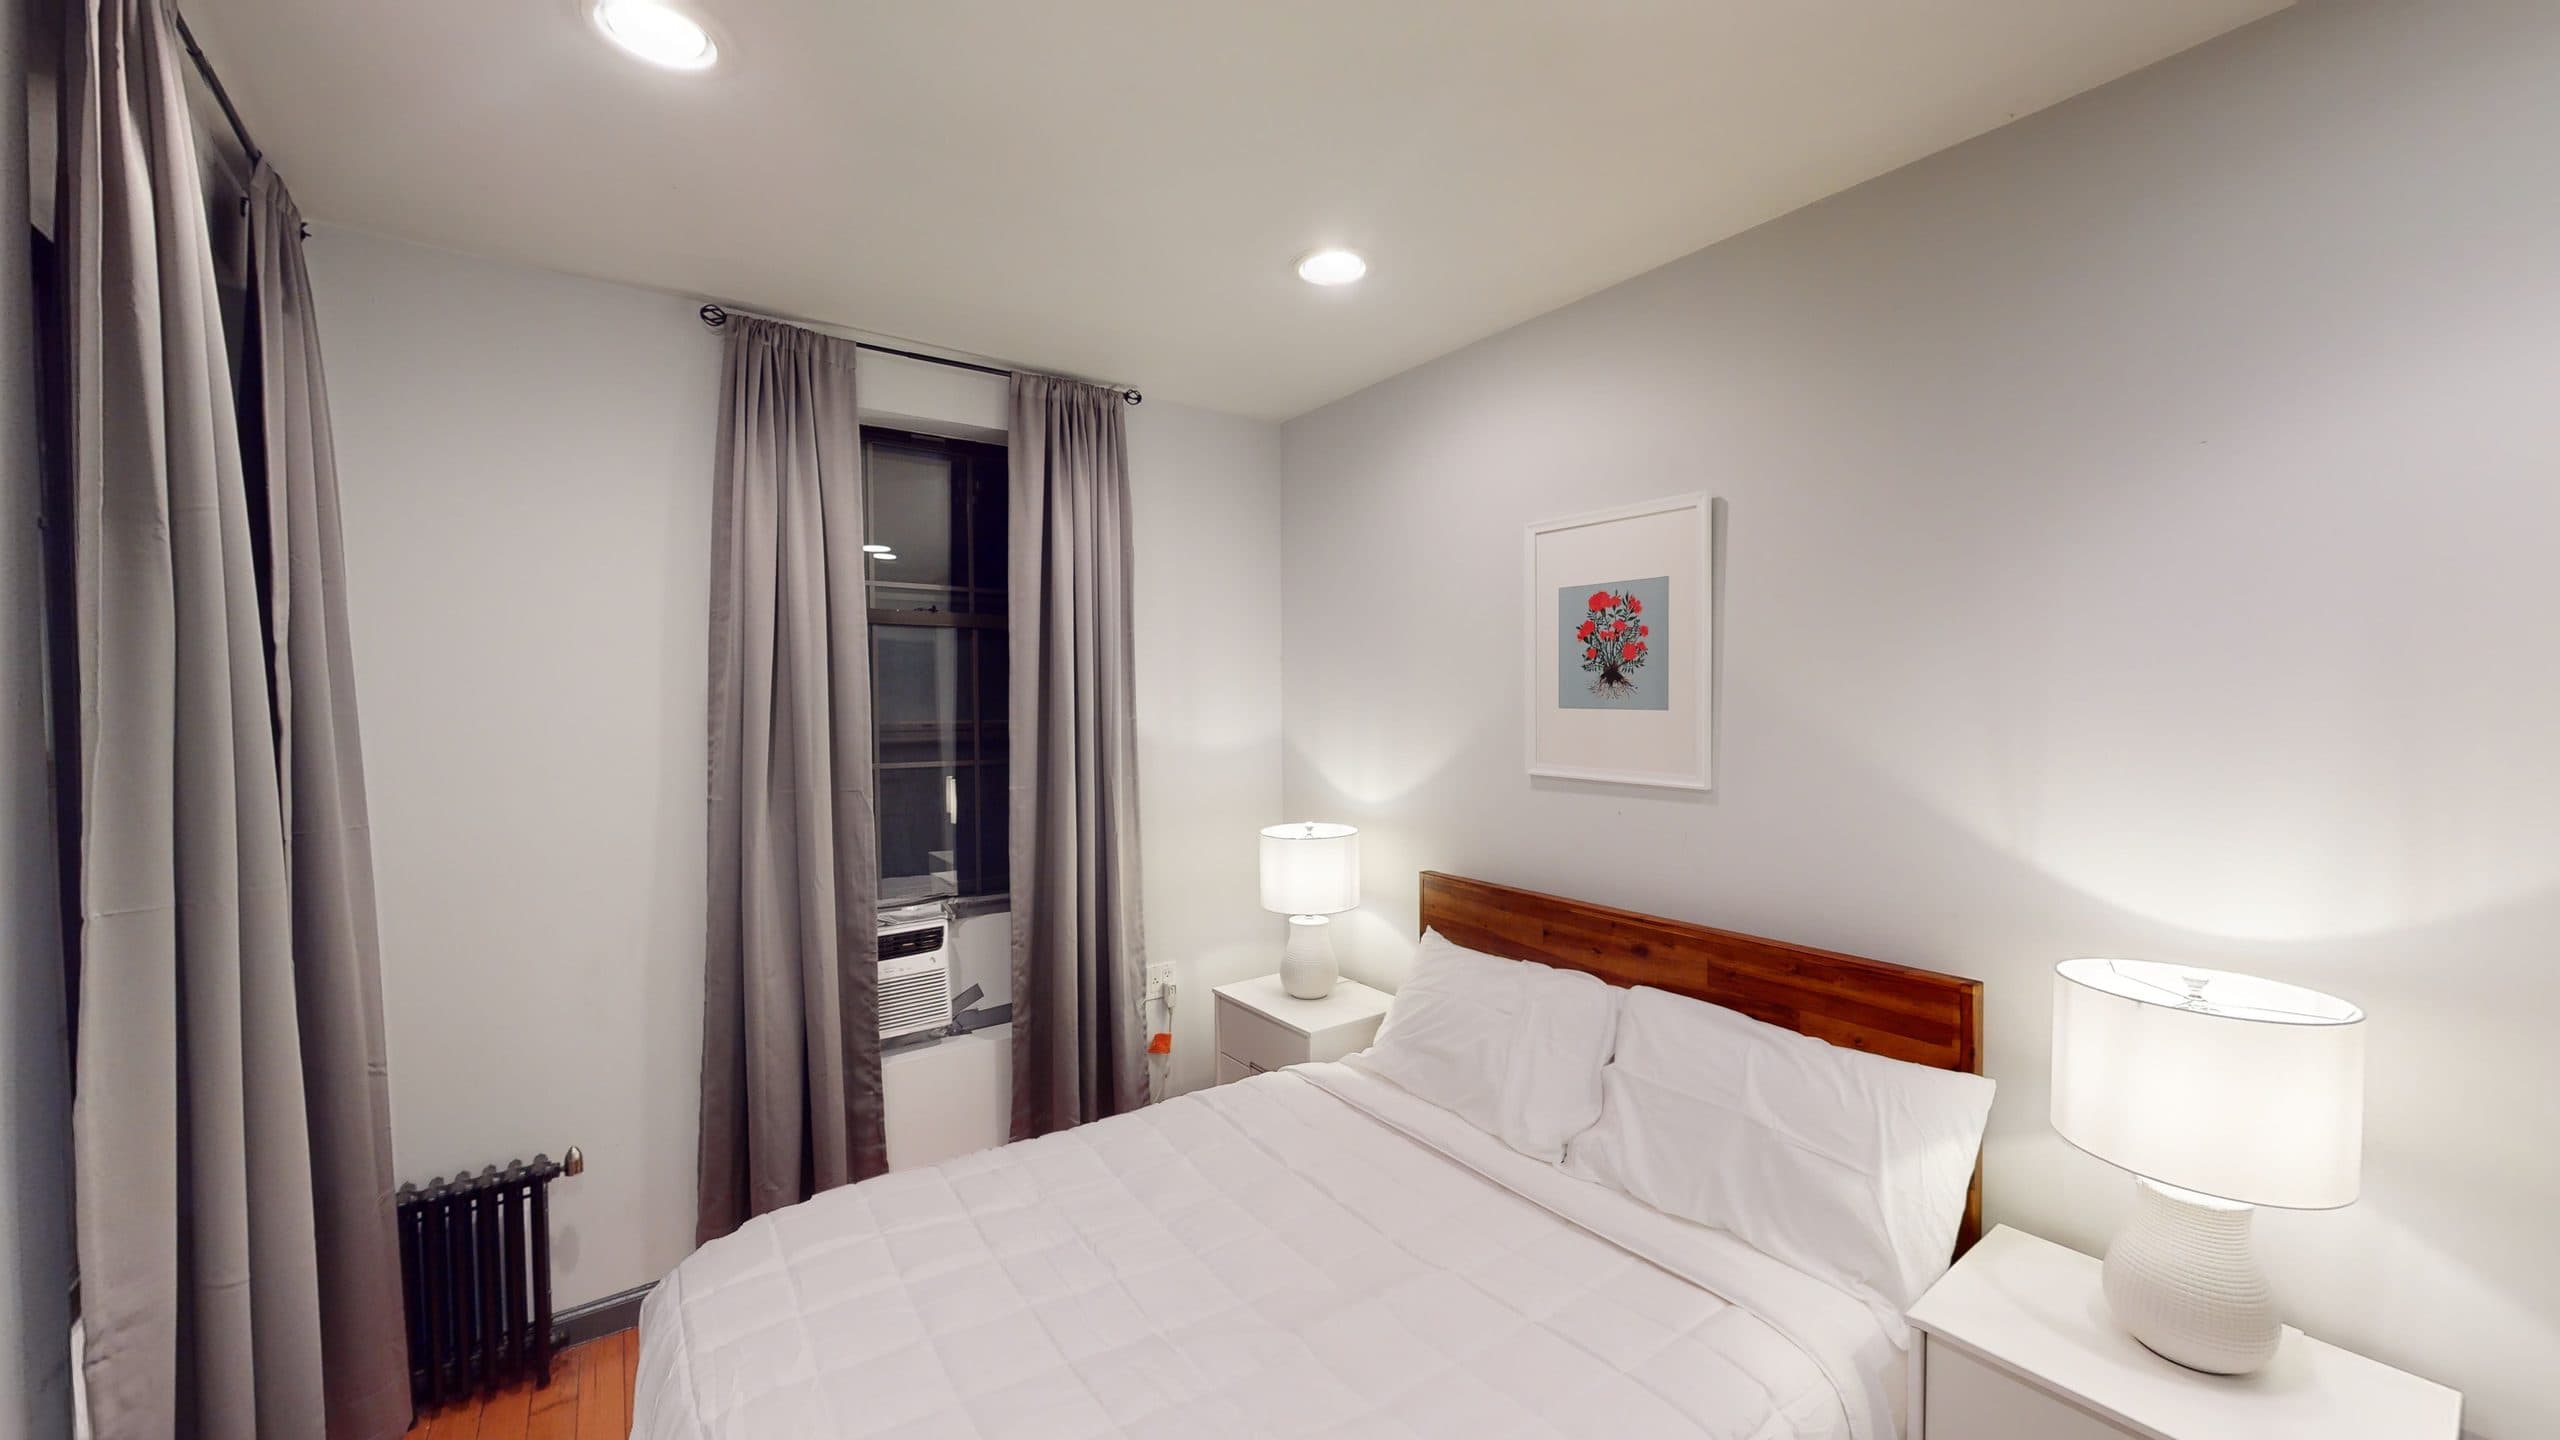 Photo 20 of #1539: Queen Bedroom A at June Homes